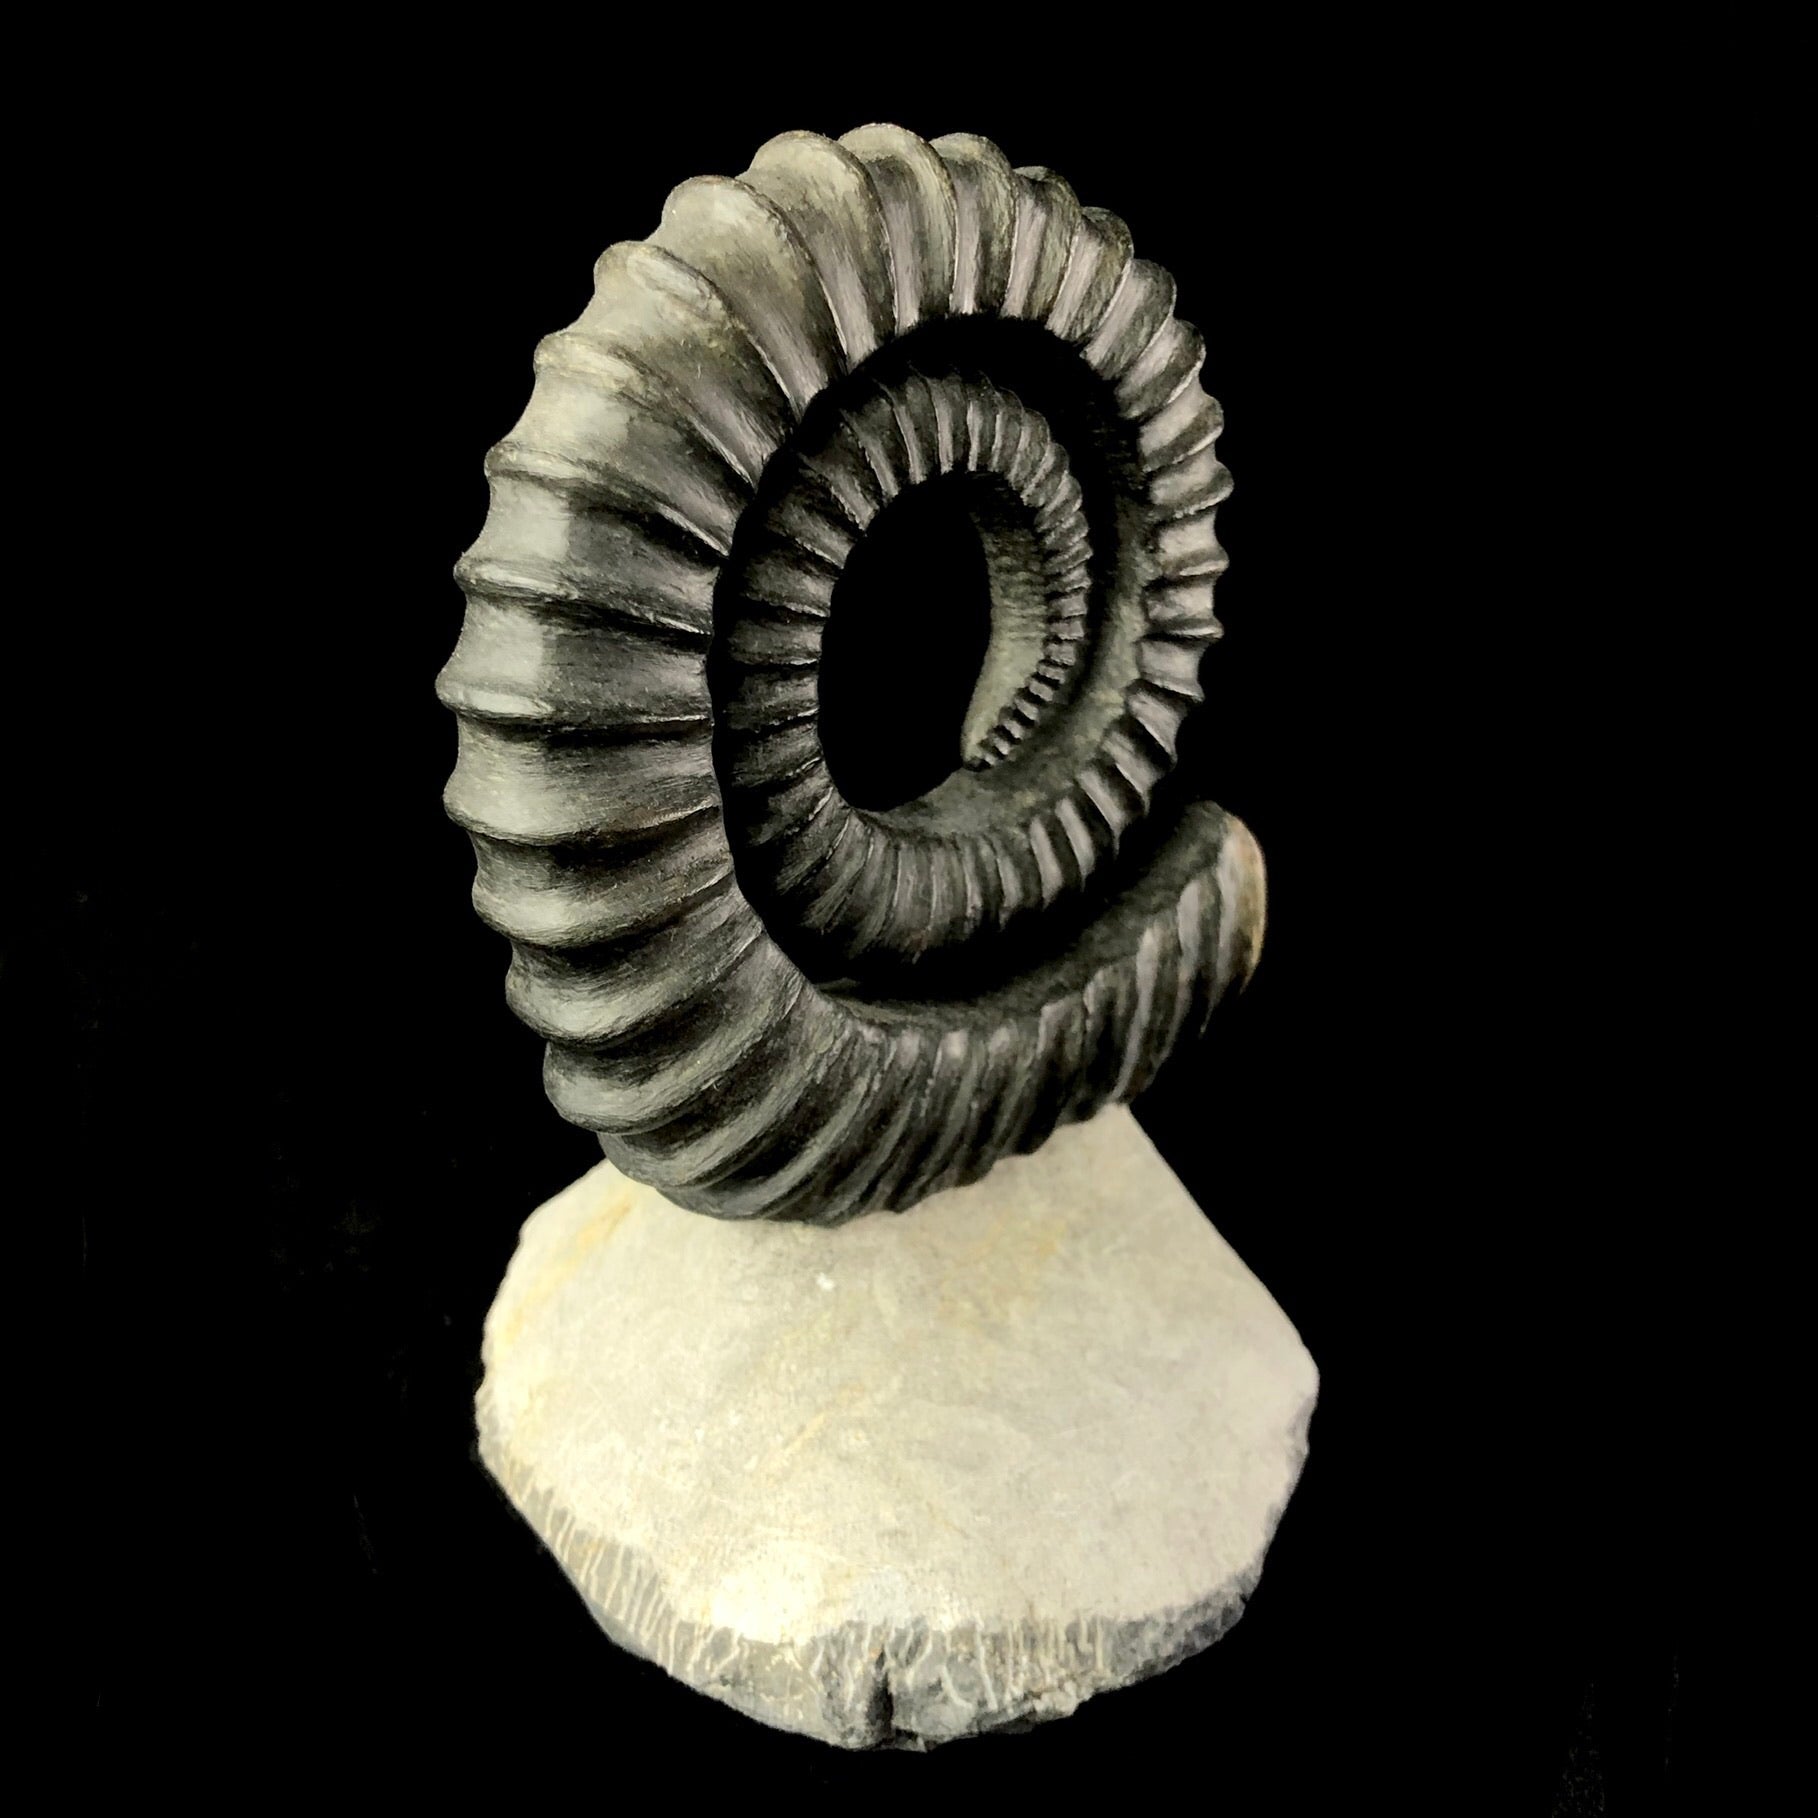 Side view of Uncoiled Ammonite Fossil